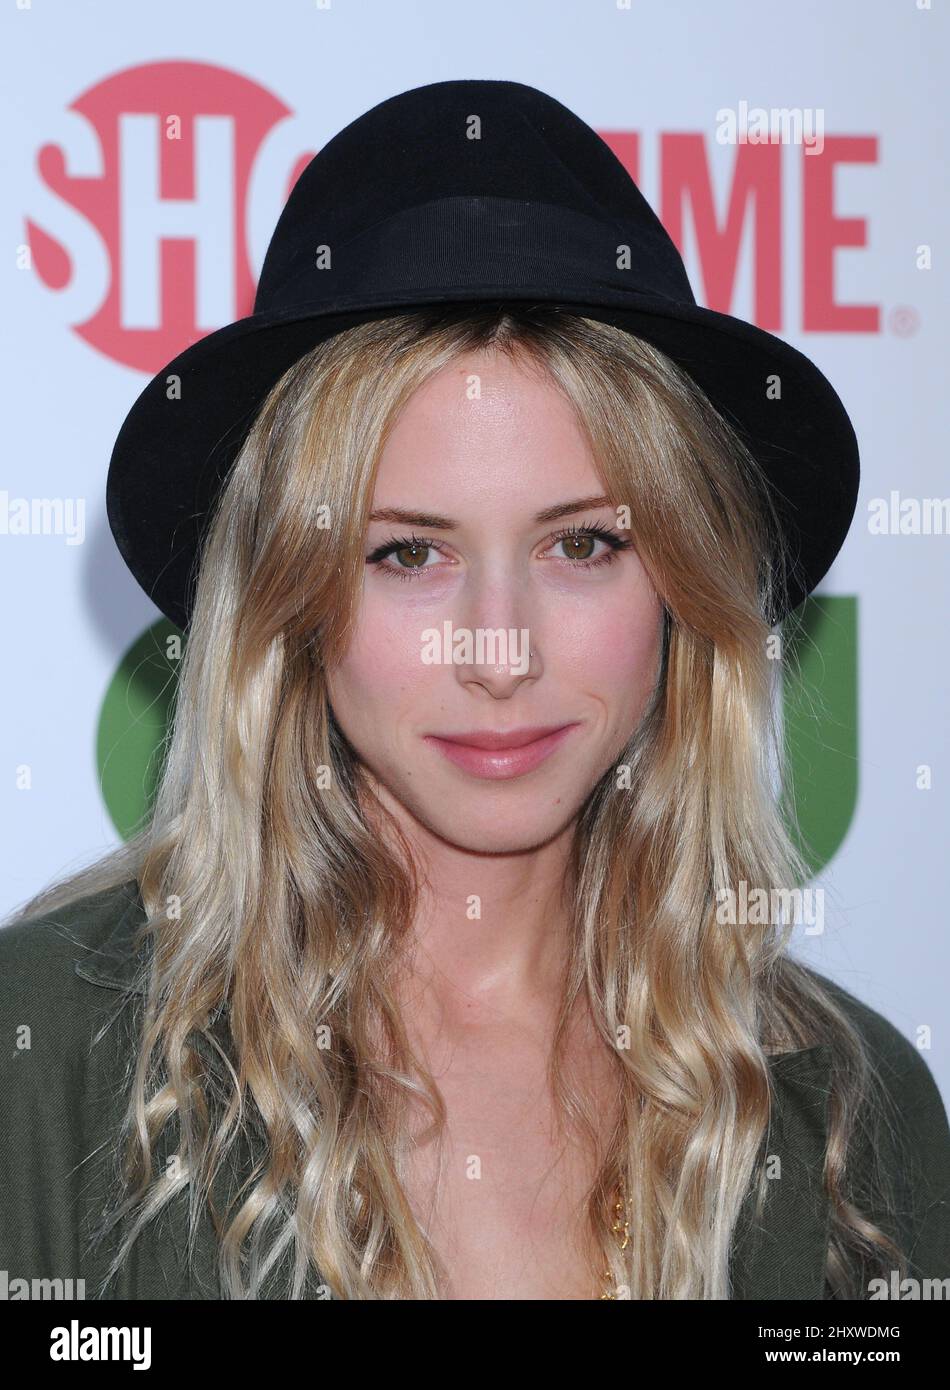 Gillian Zinser during the CBS,The CW And Showtime TCA Party held at The Pagoda, California Stock Photo